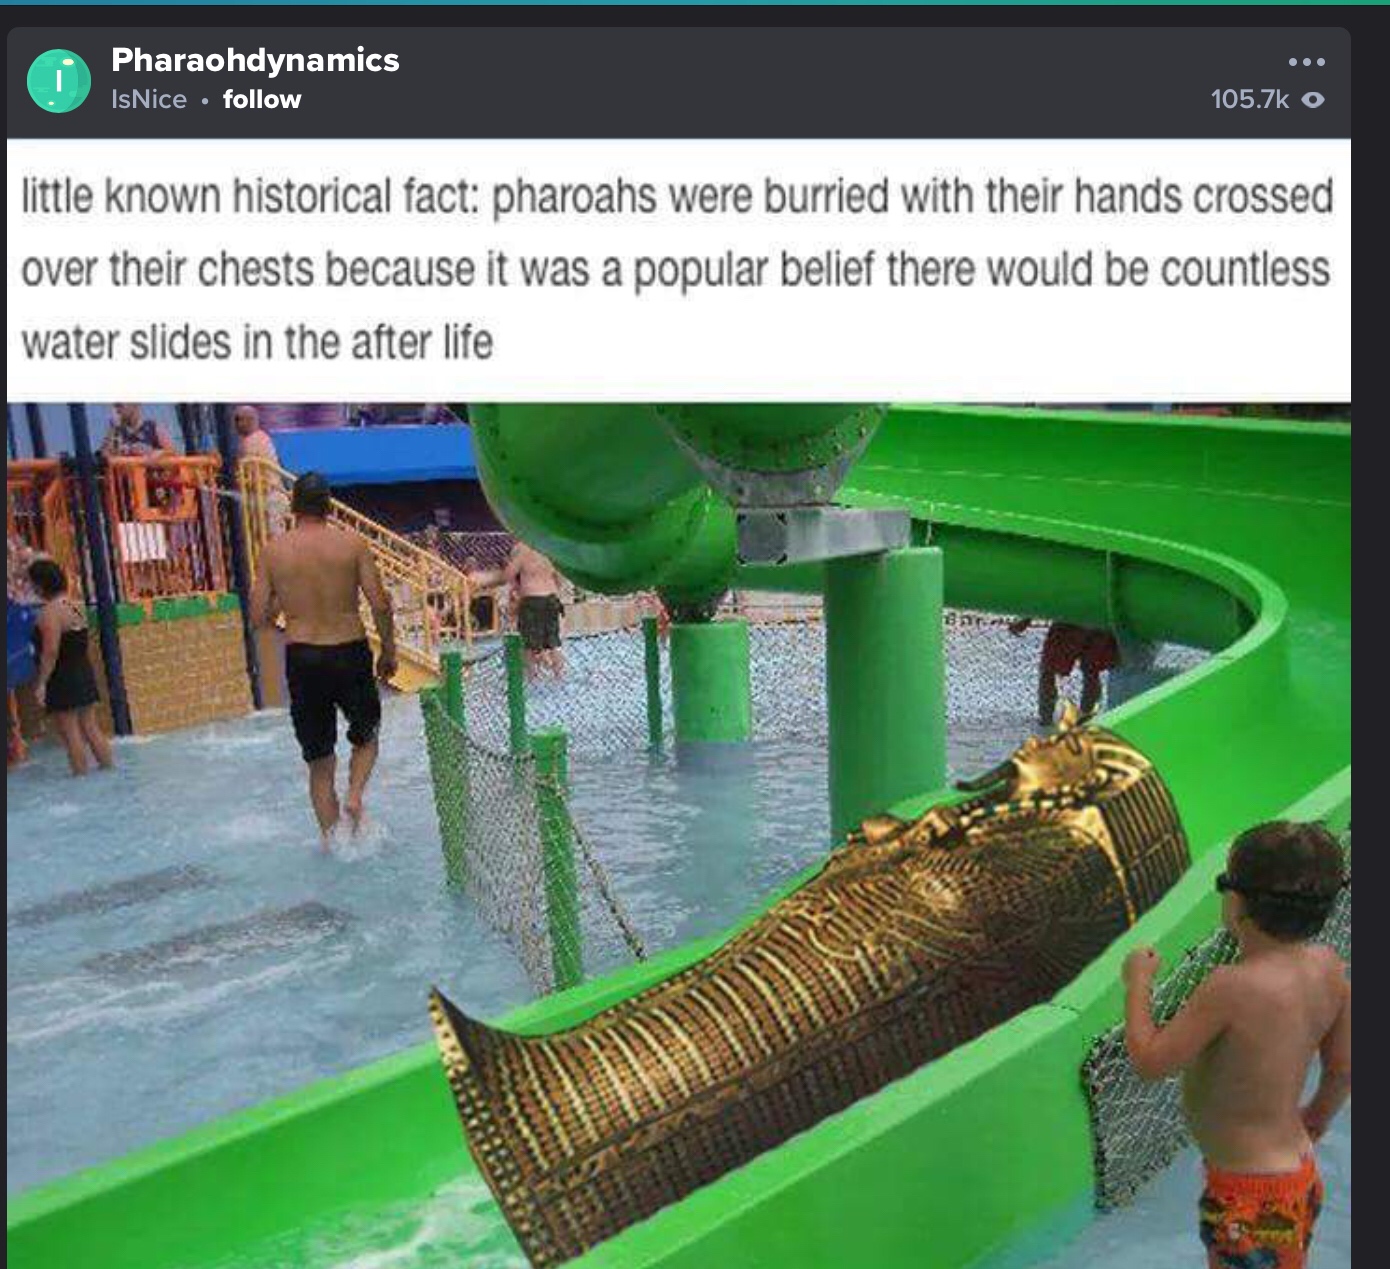 mummy on waterslide - Pharaohdynamics IsNice 0 little known historical fact Pharoahs were burried with their hands crossed over their chests because it was a popular belief there would be countless water slides in the after life